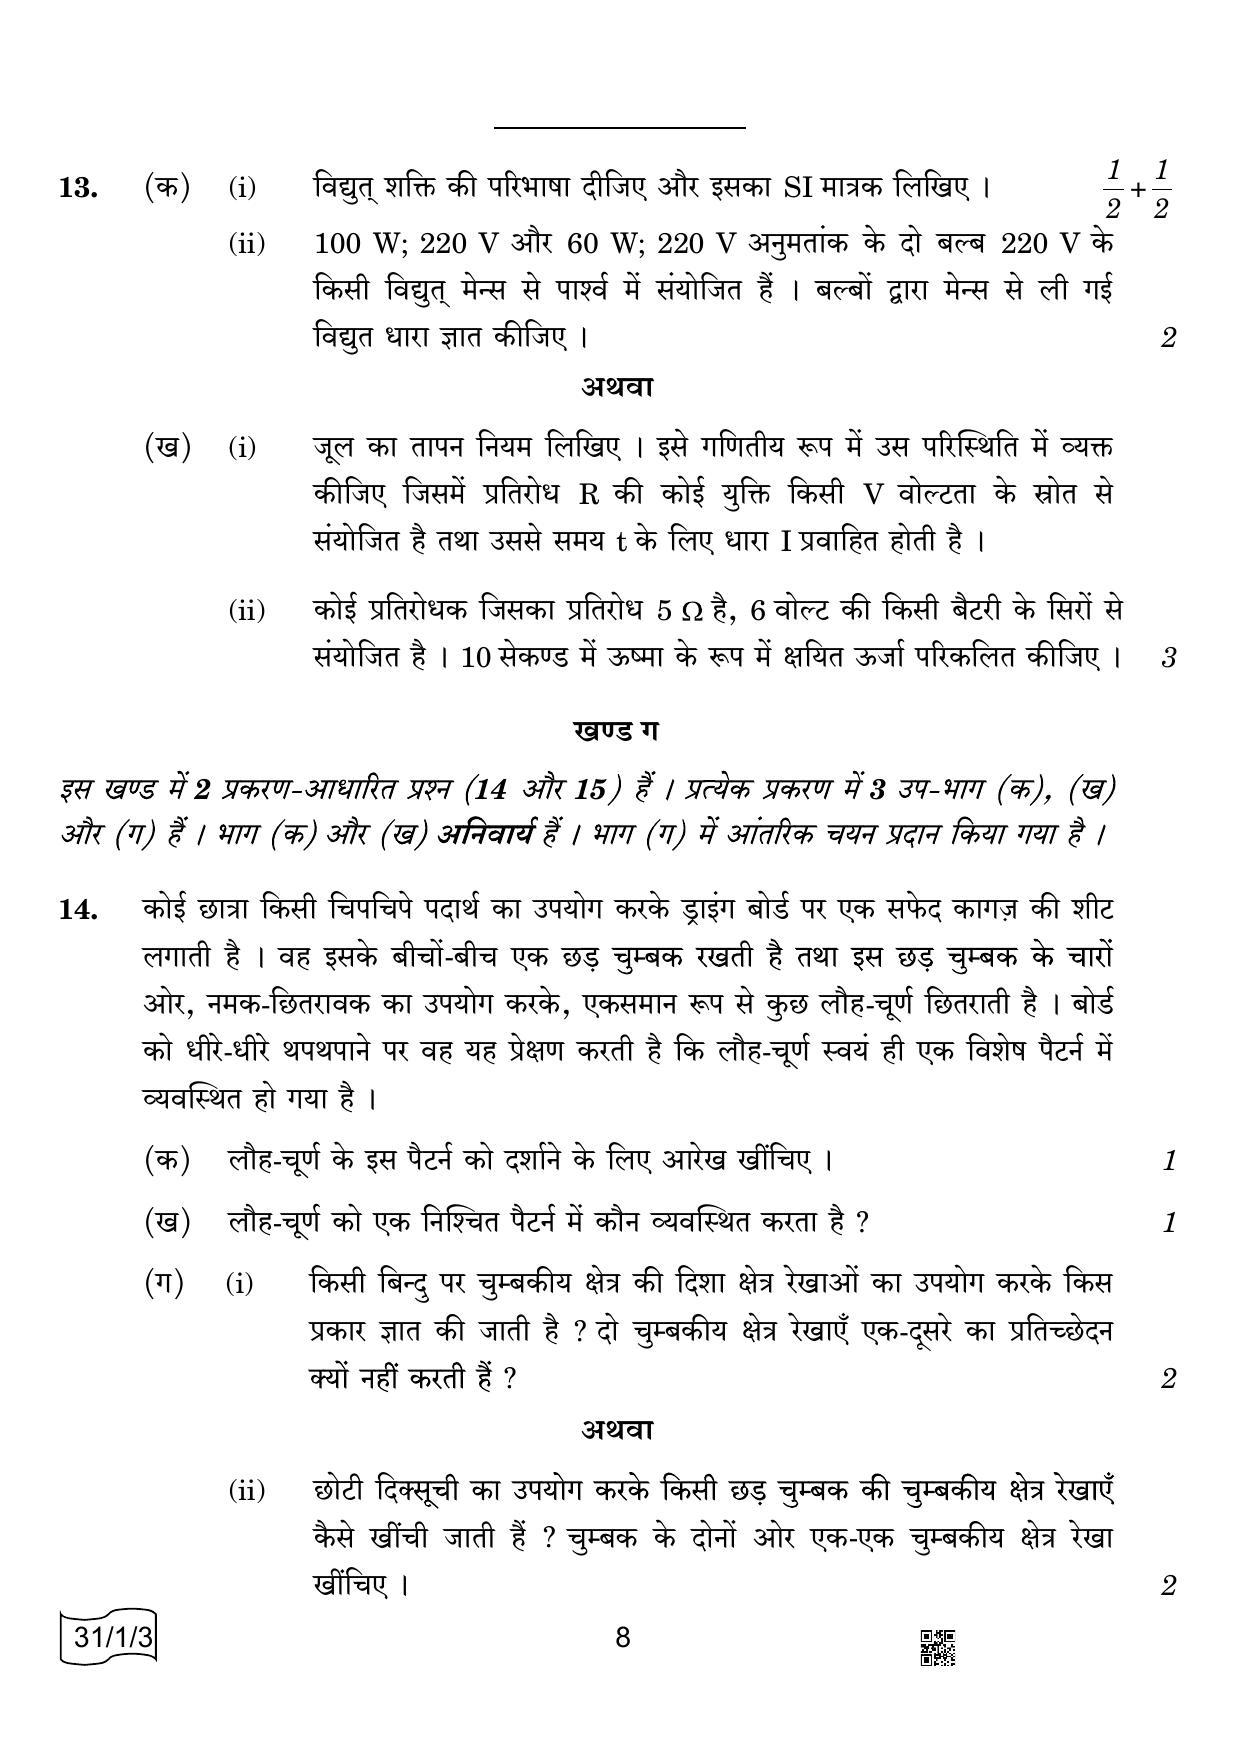 CBSE Class 10 31-1-3 Science 2022 Question Paper - Page 8